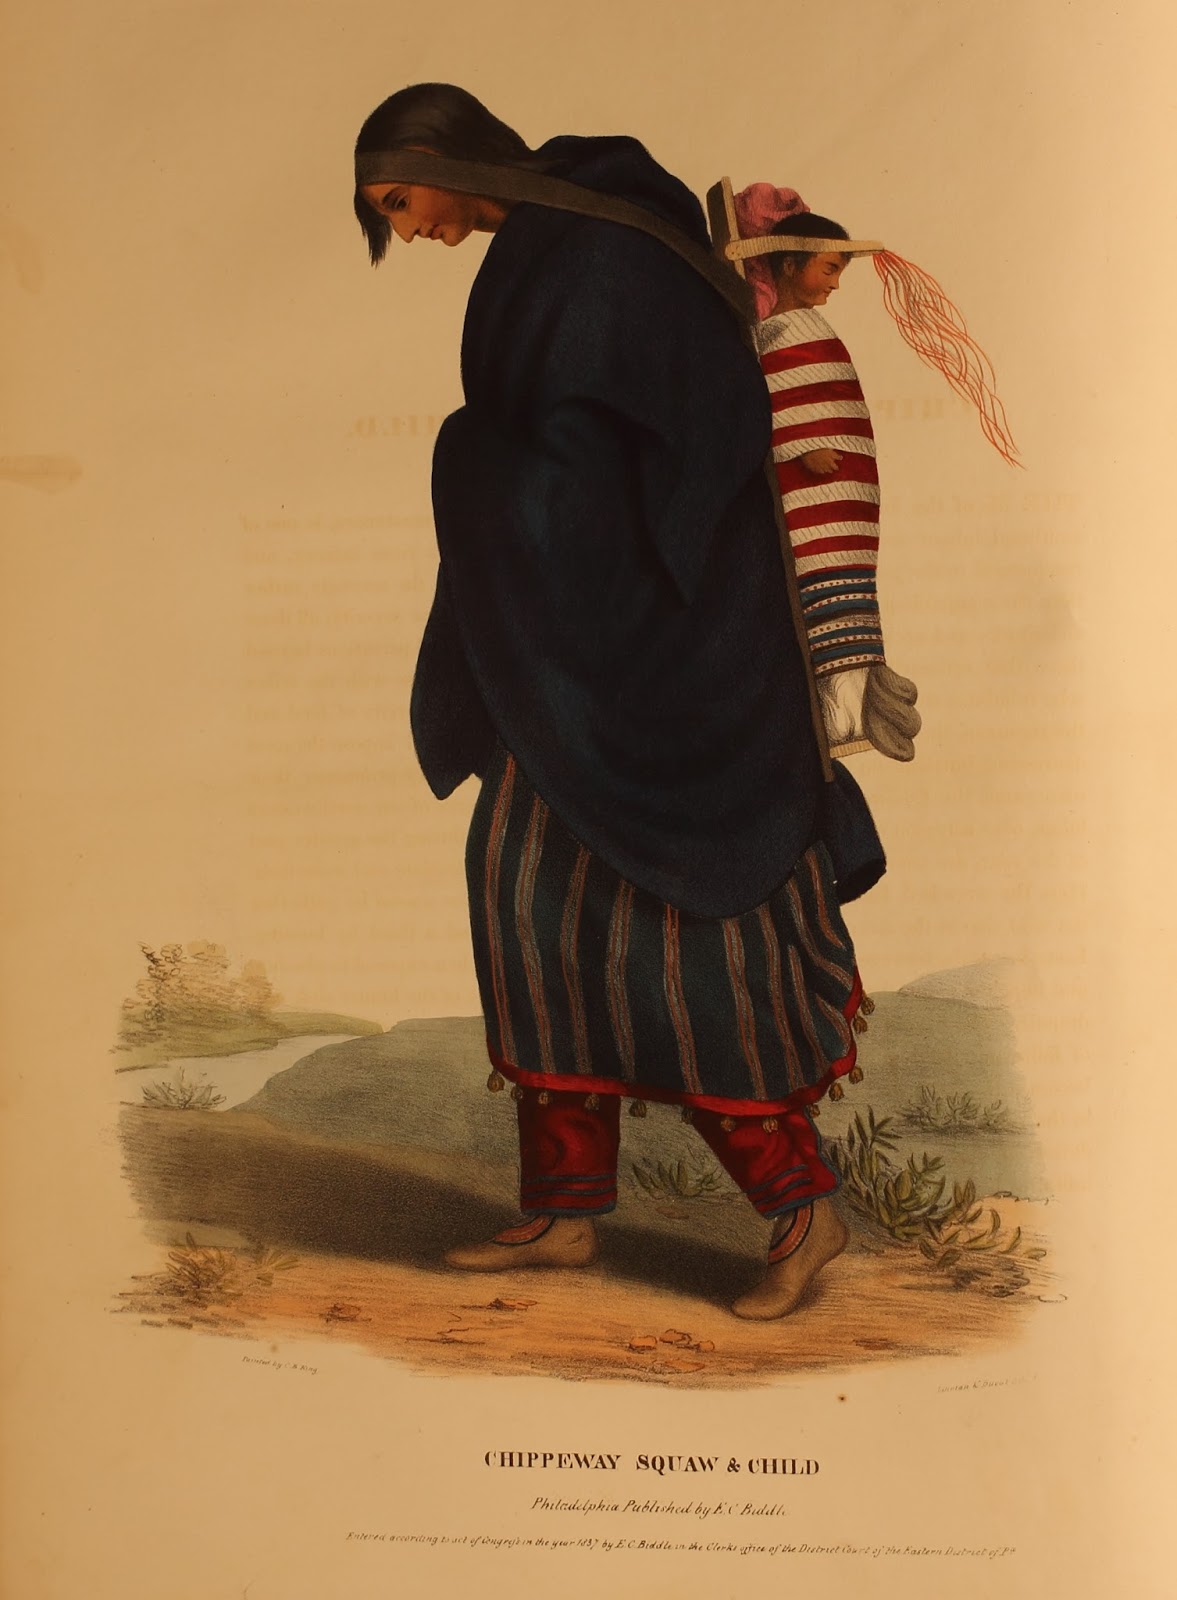 Illustration of a woman carrying infant on her back, Text: Chippeway Squaw and Child